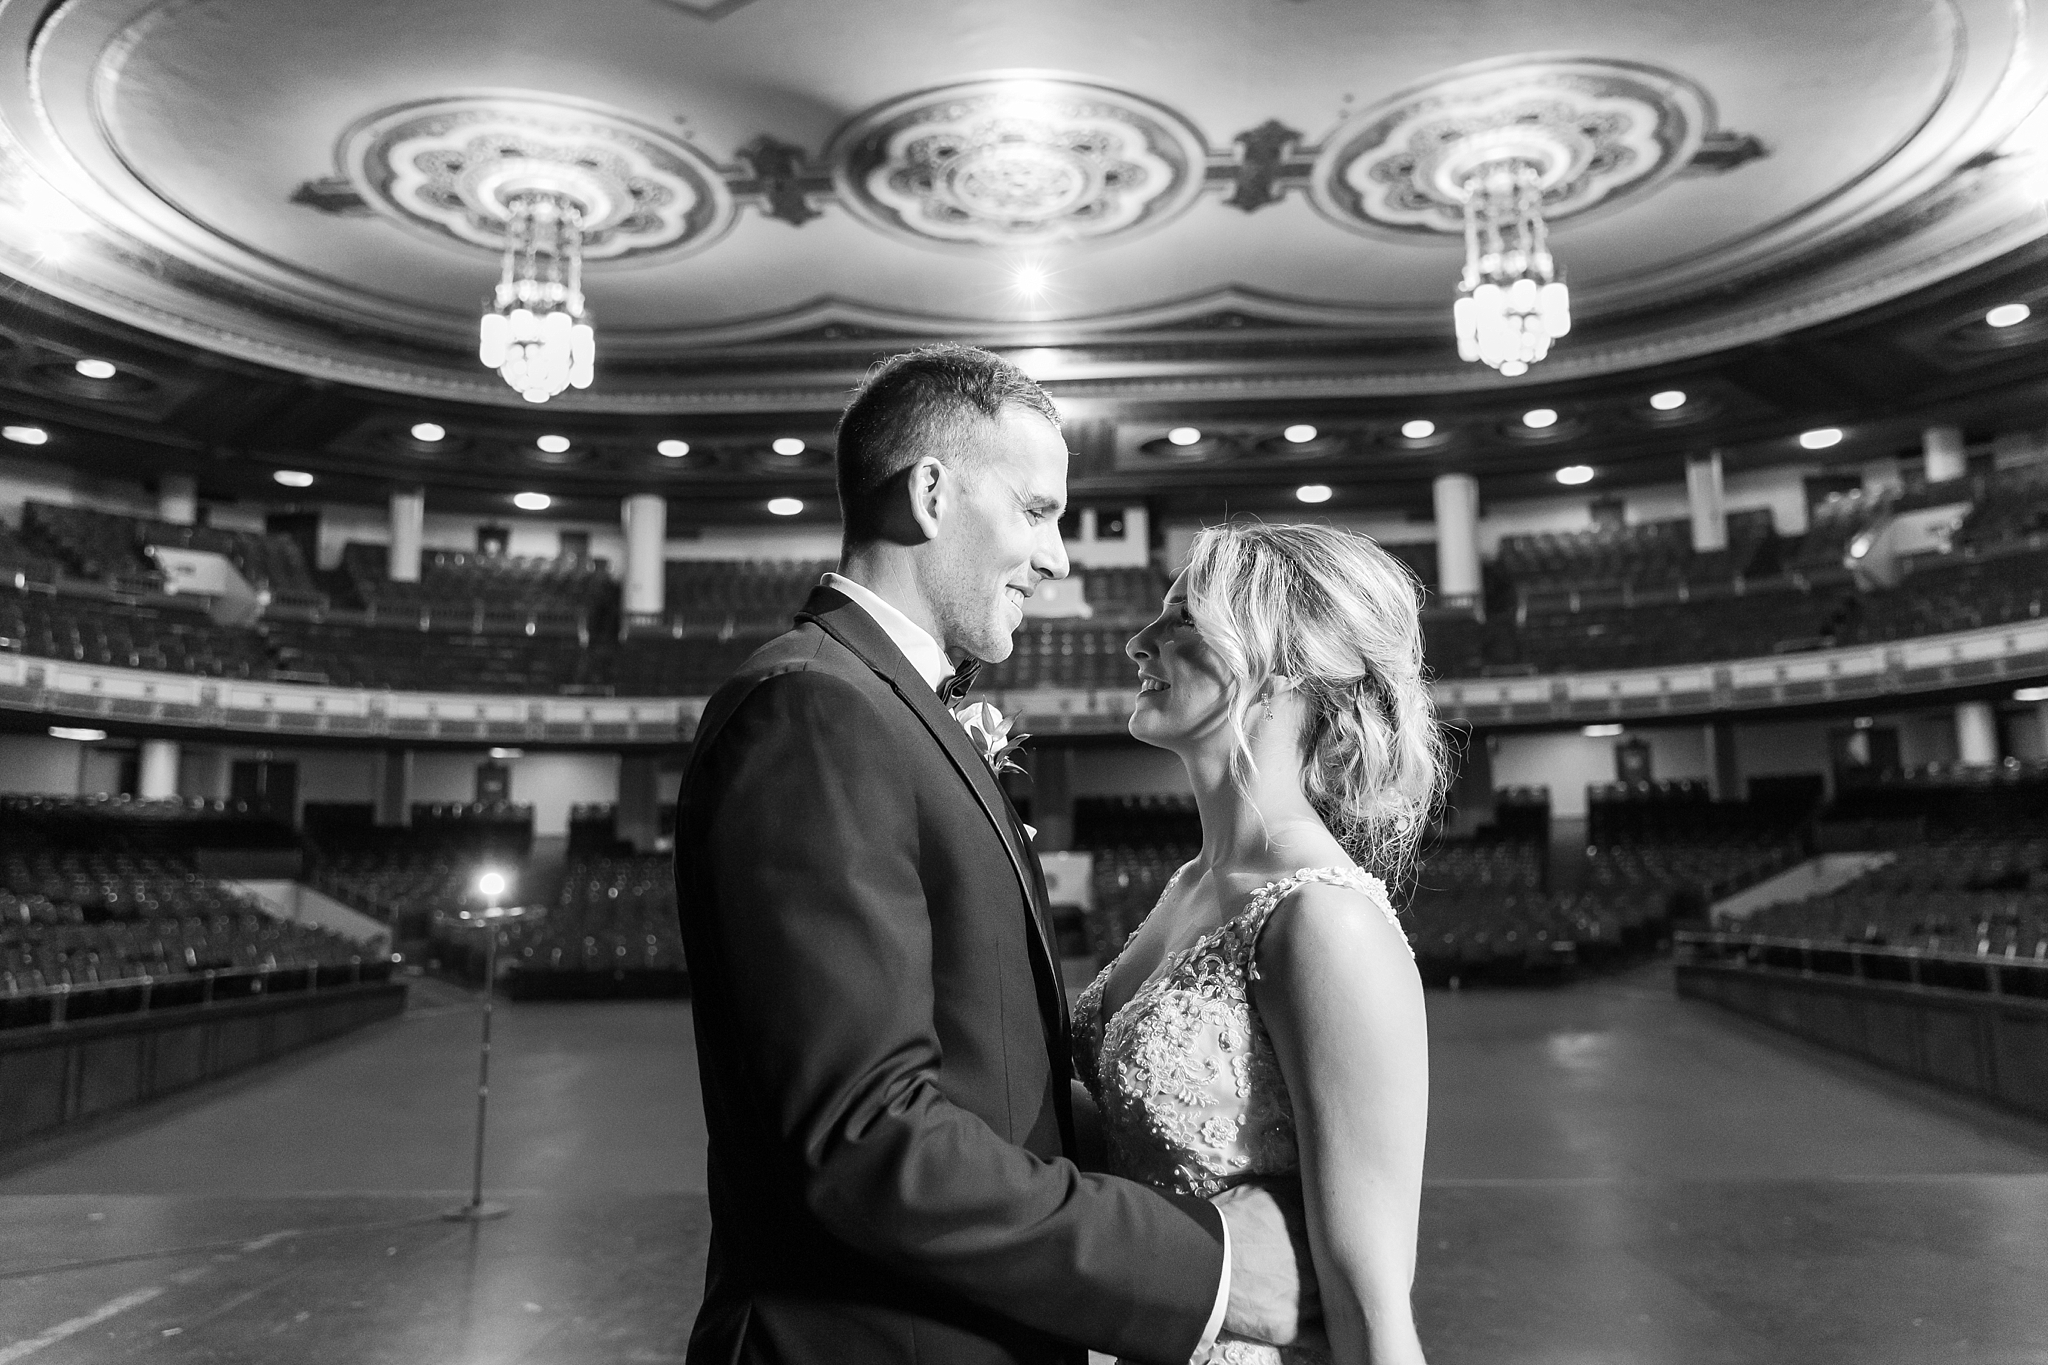 candid-romantic-wedding-photos-at-the-masonic-temple-belle-isle-detroit-institute-of-arts-in-detroit-michigan-by-courtney-carolyn-photography_0064.jpg